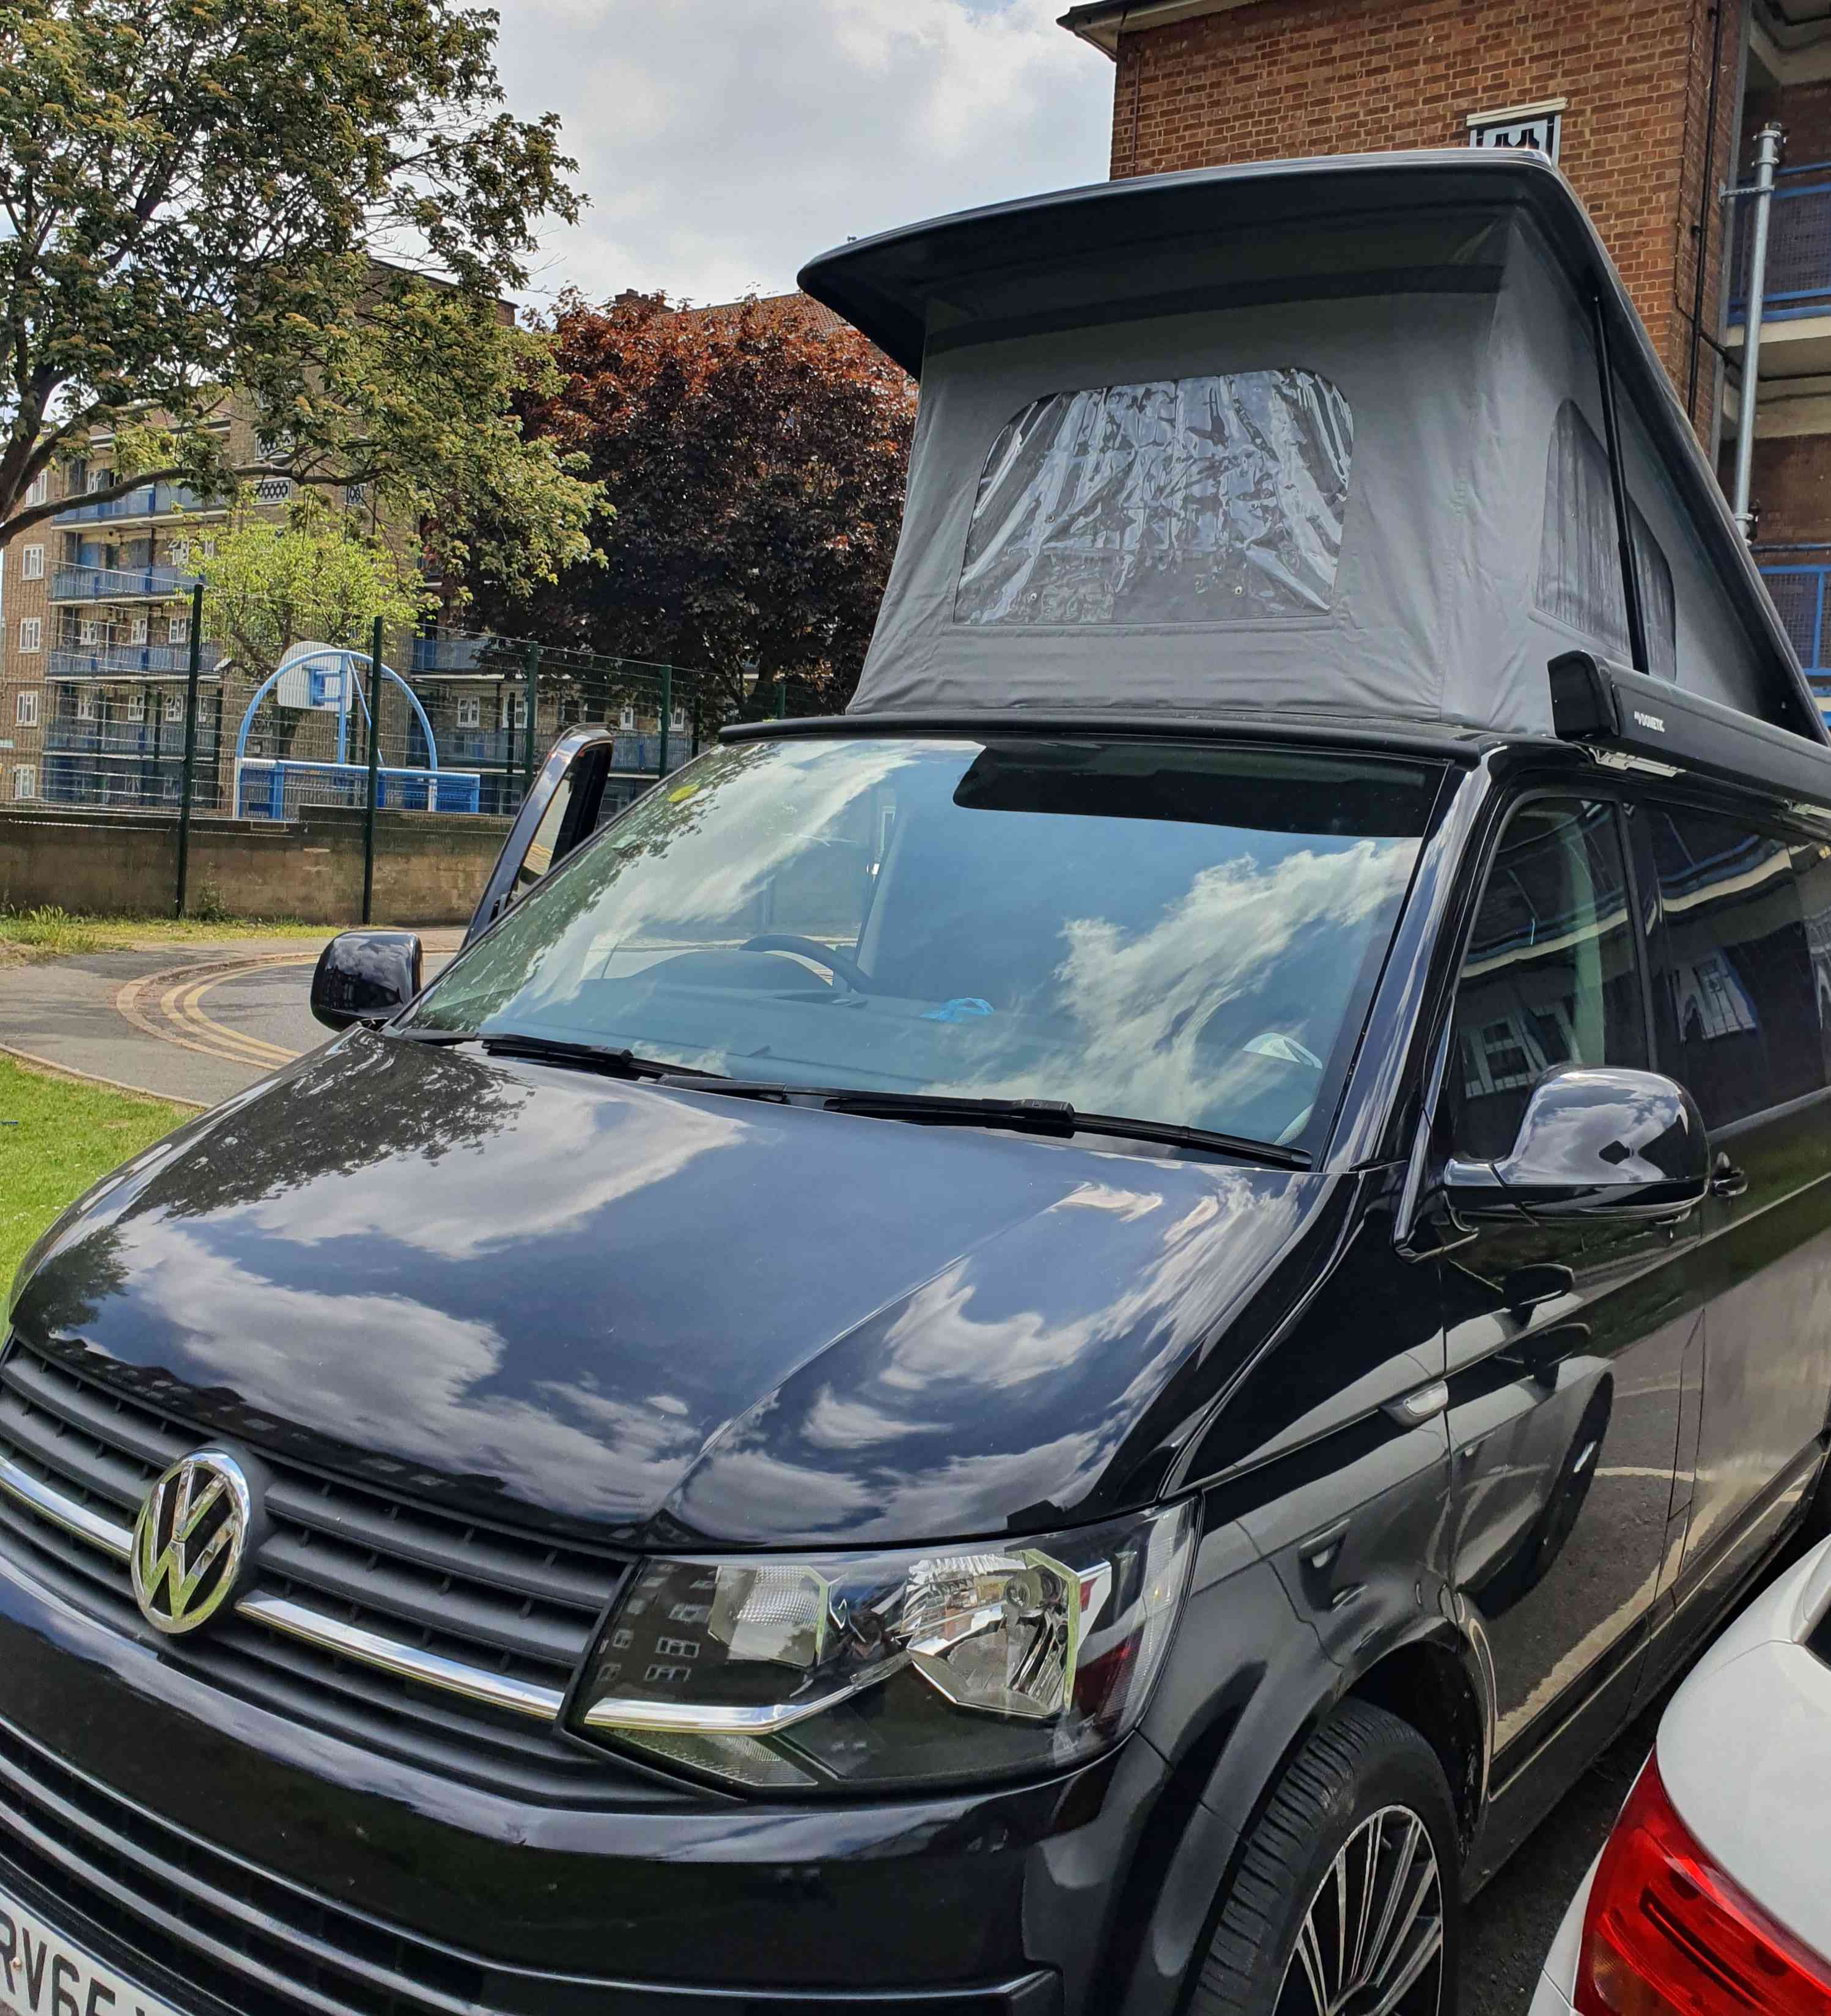 A VW T6 Campervan called RV and for hire in London, England